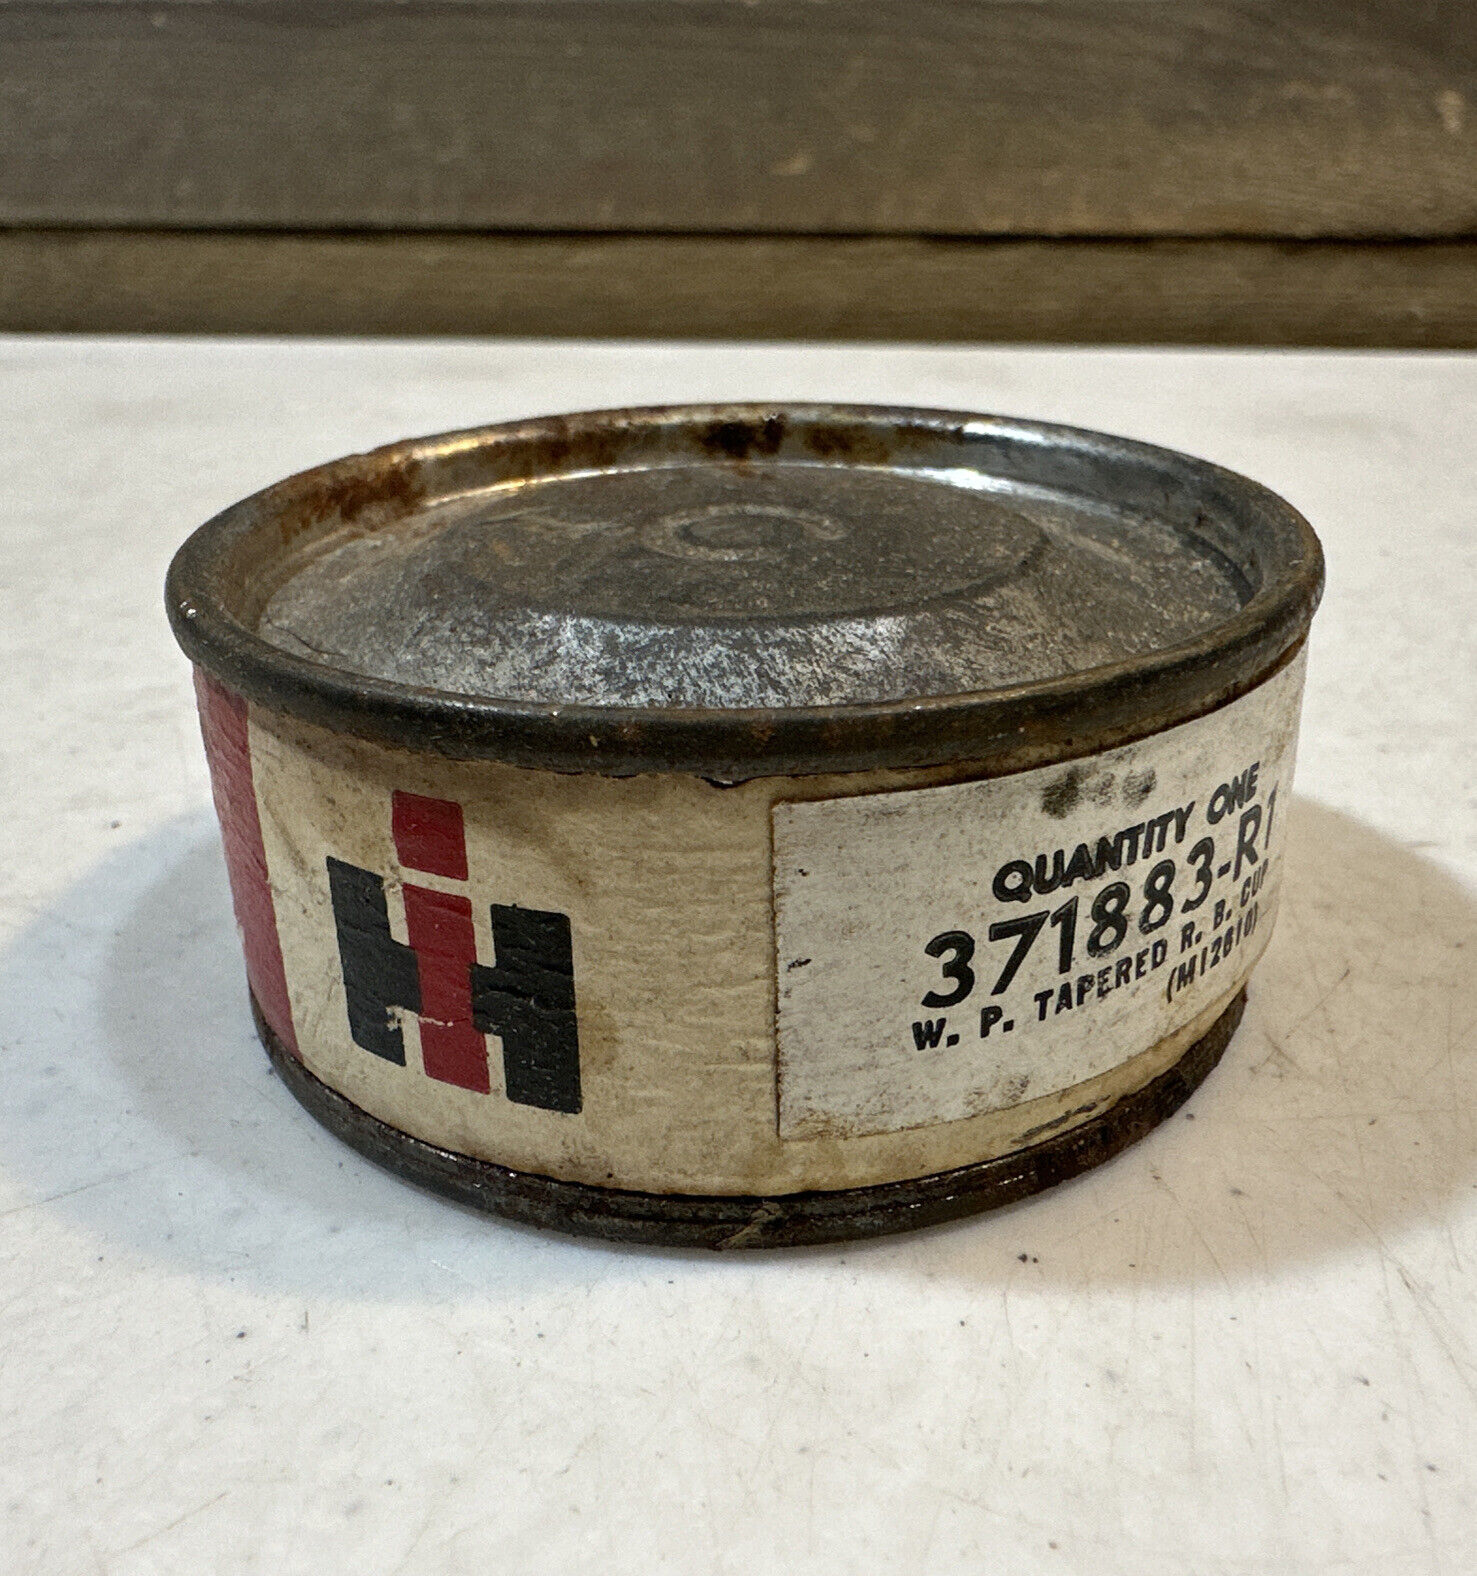 International Harvester Vintage NOS WP Tapered RB Cup Ball Bearing # 371883-R1